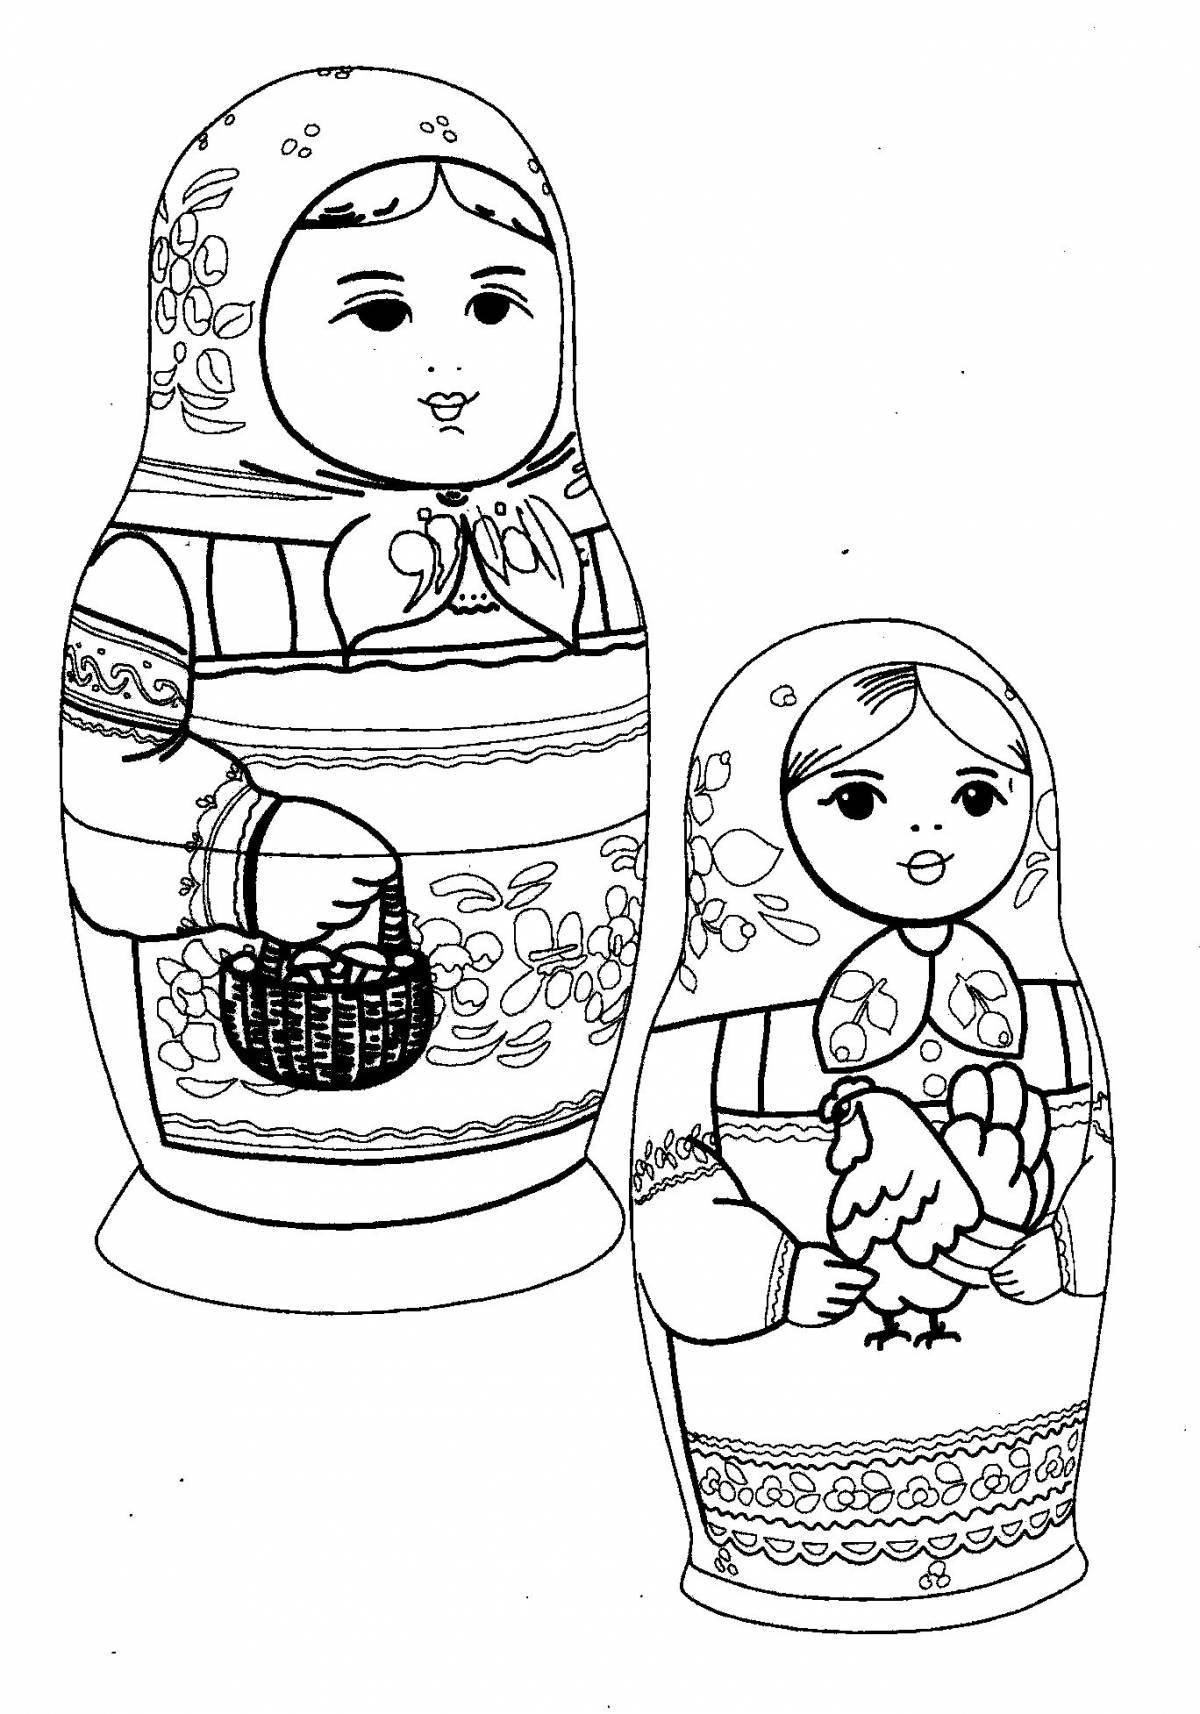 Colourful Russian traditions coloring book